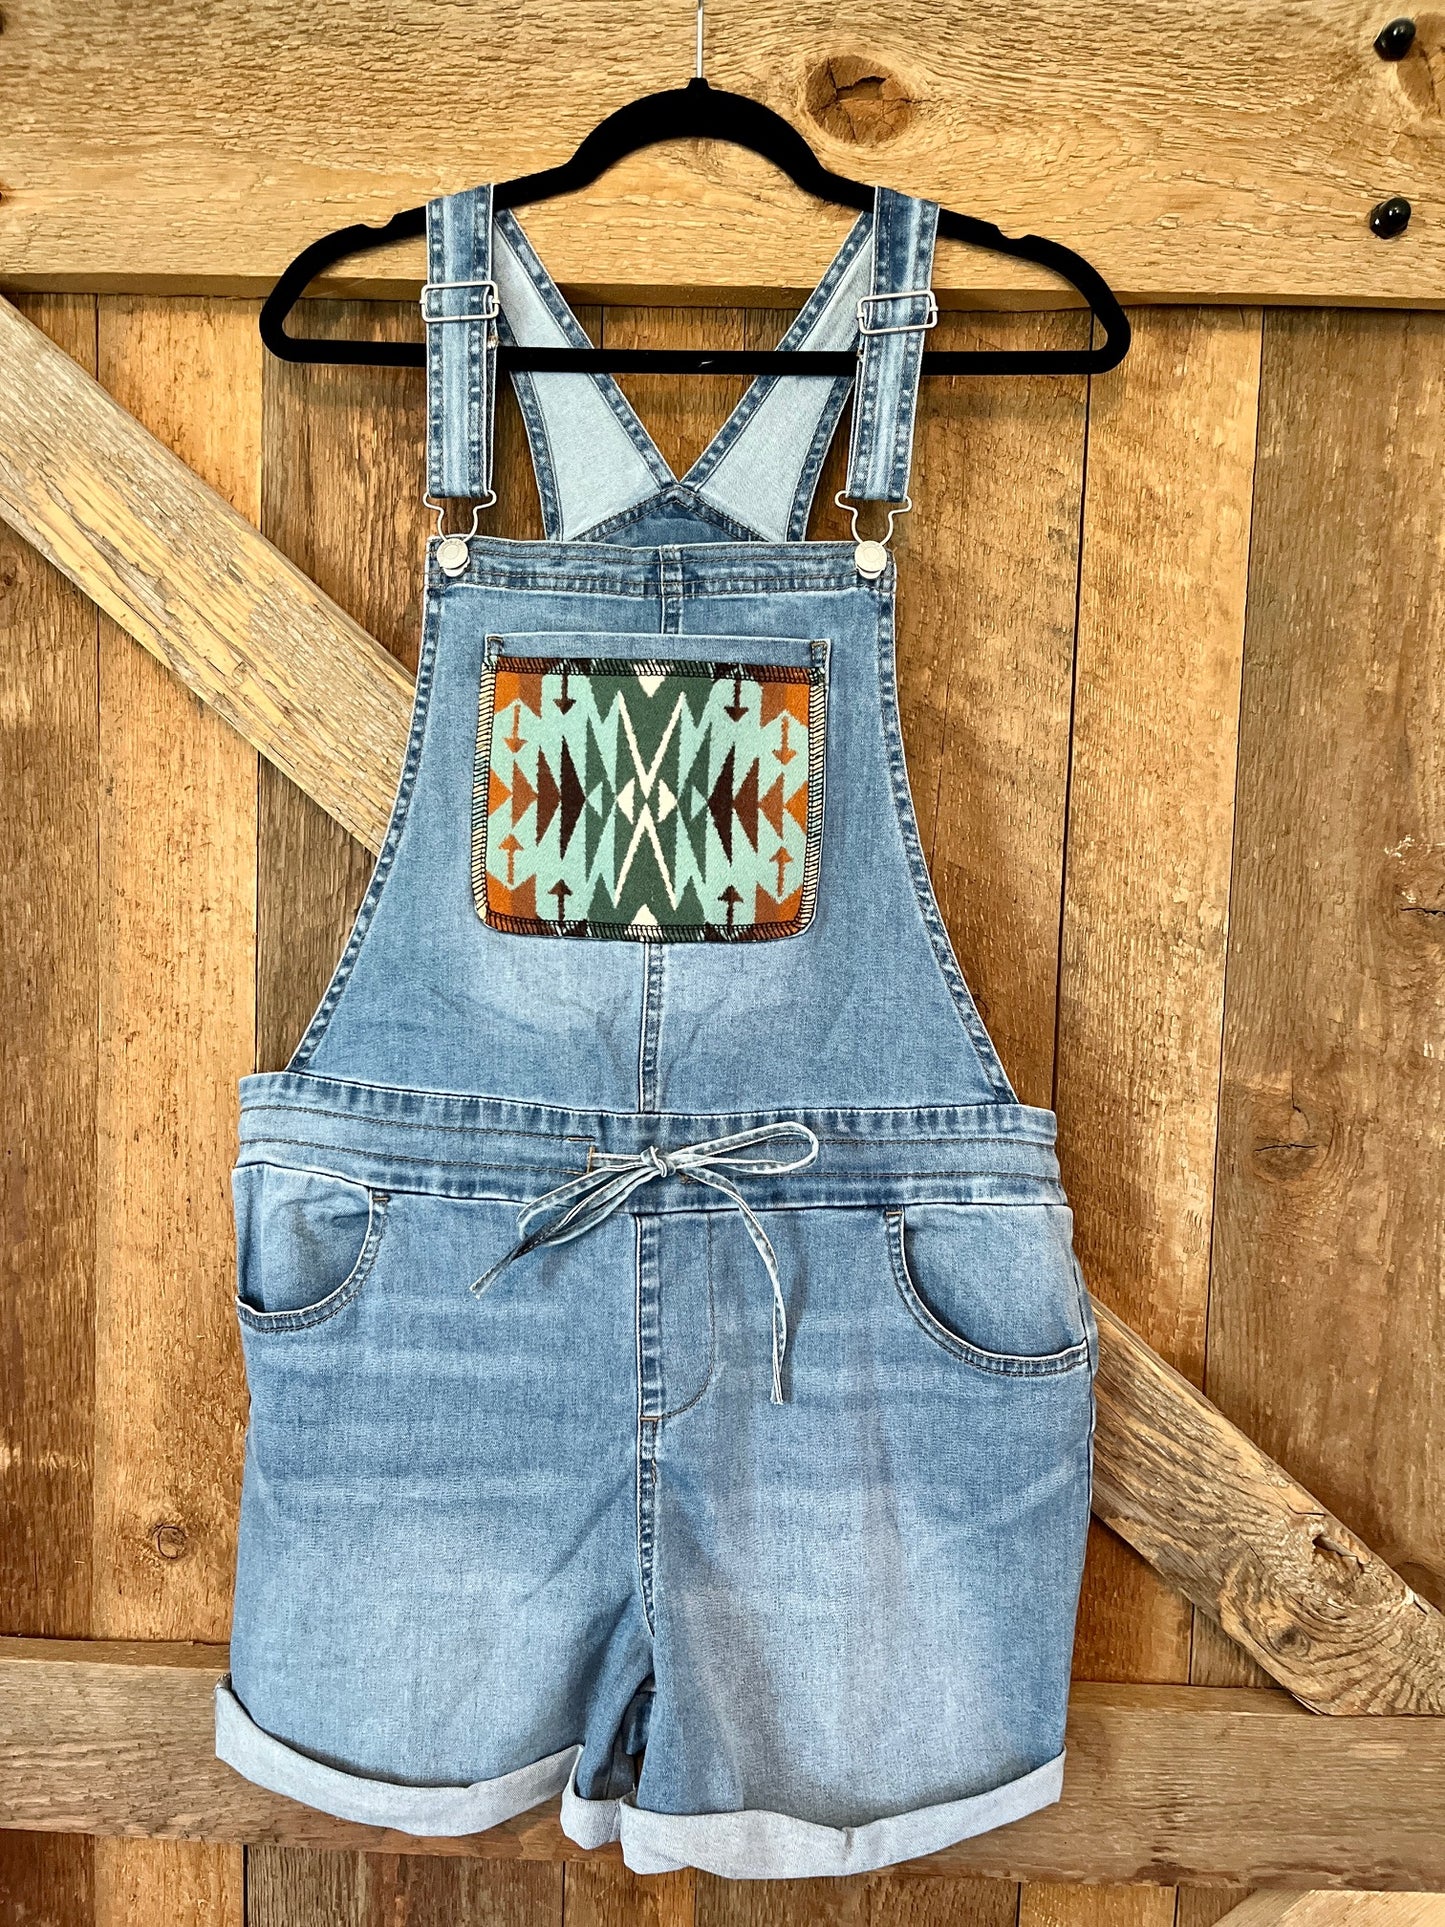 Denim Overall Shorts - Size Small